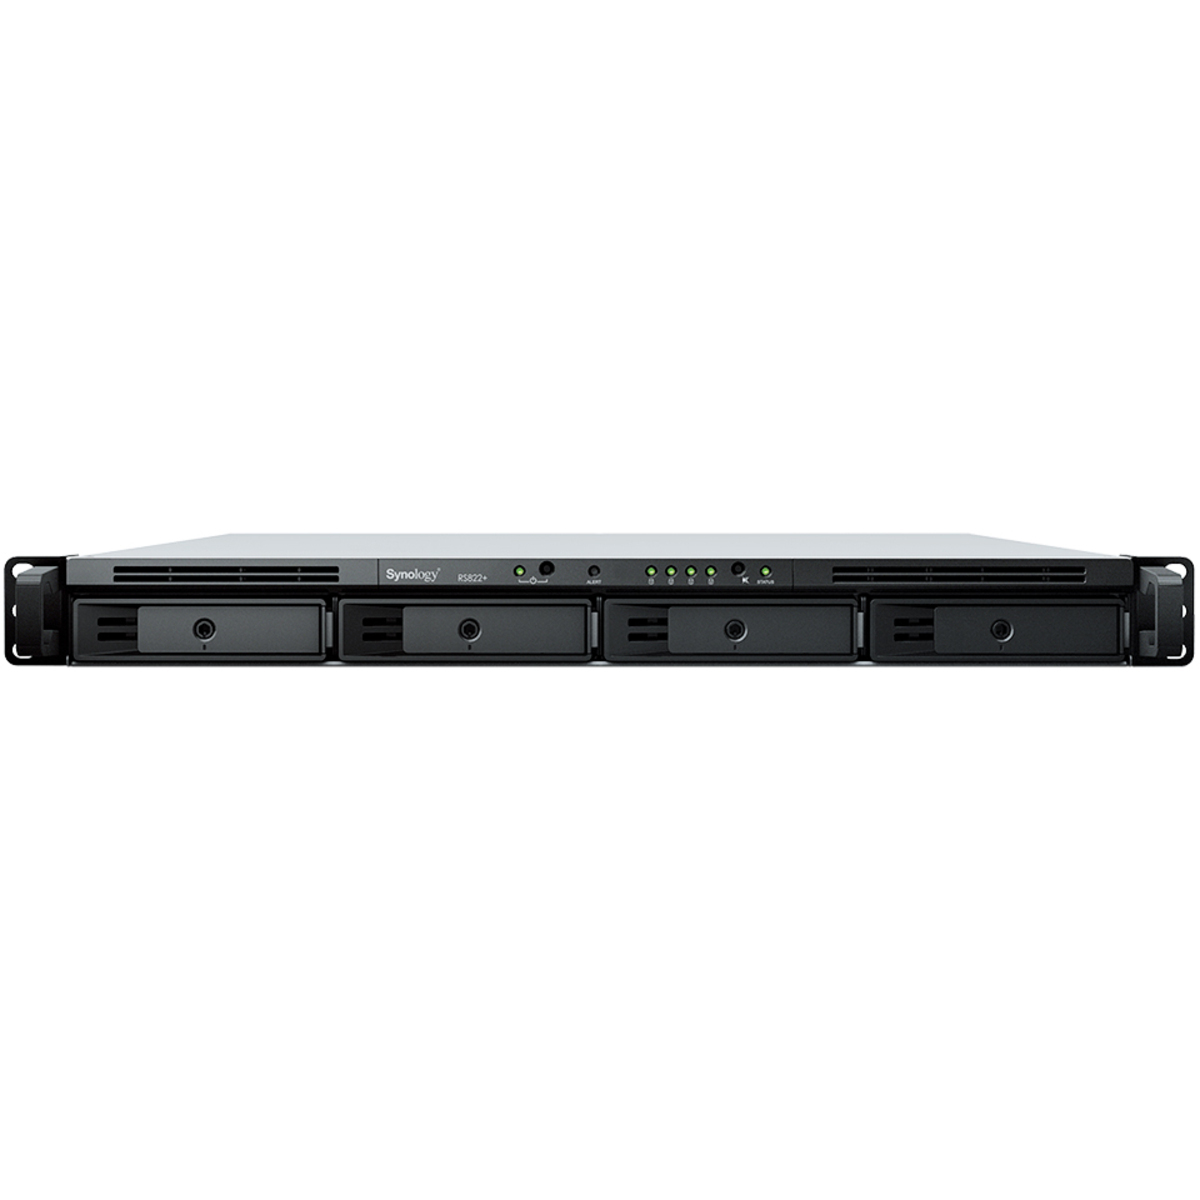 Synology RackStation RS822RP+ 54tb 4-Bay RackMount Multimedia / Power User / Business NAS - Network Attached Storage Device 3x18tb Seagate IronWolf Pro ST18000NT001 3.5 7200rpm SATA 6Gb/s HDD NAS Class Drives Installed - Burn-In Tested - FREE RAM UPGRADE RackStation RS822RP+